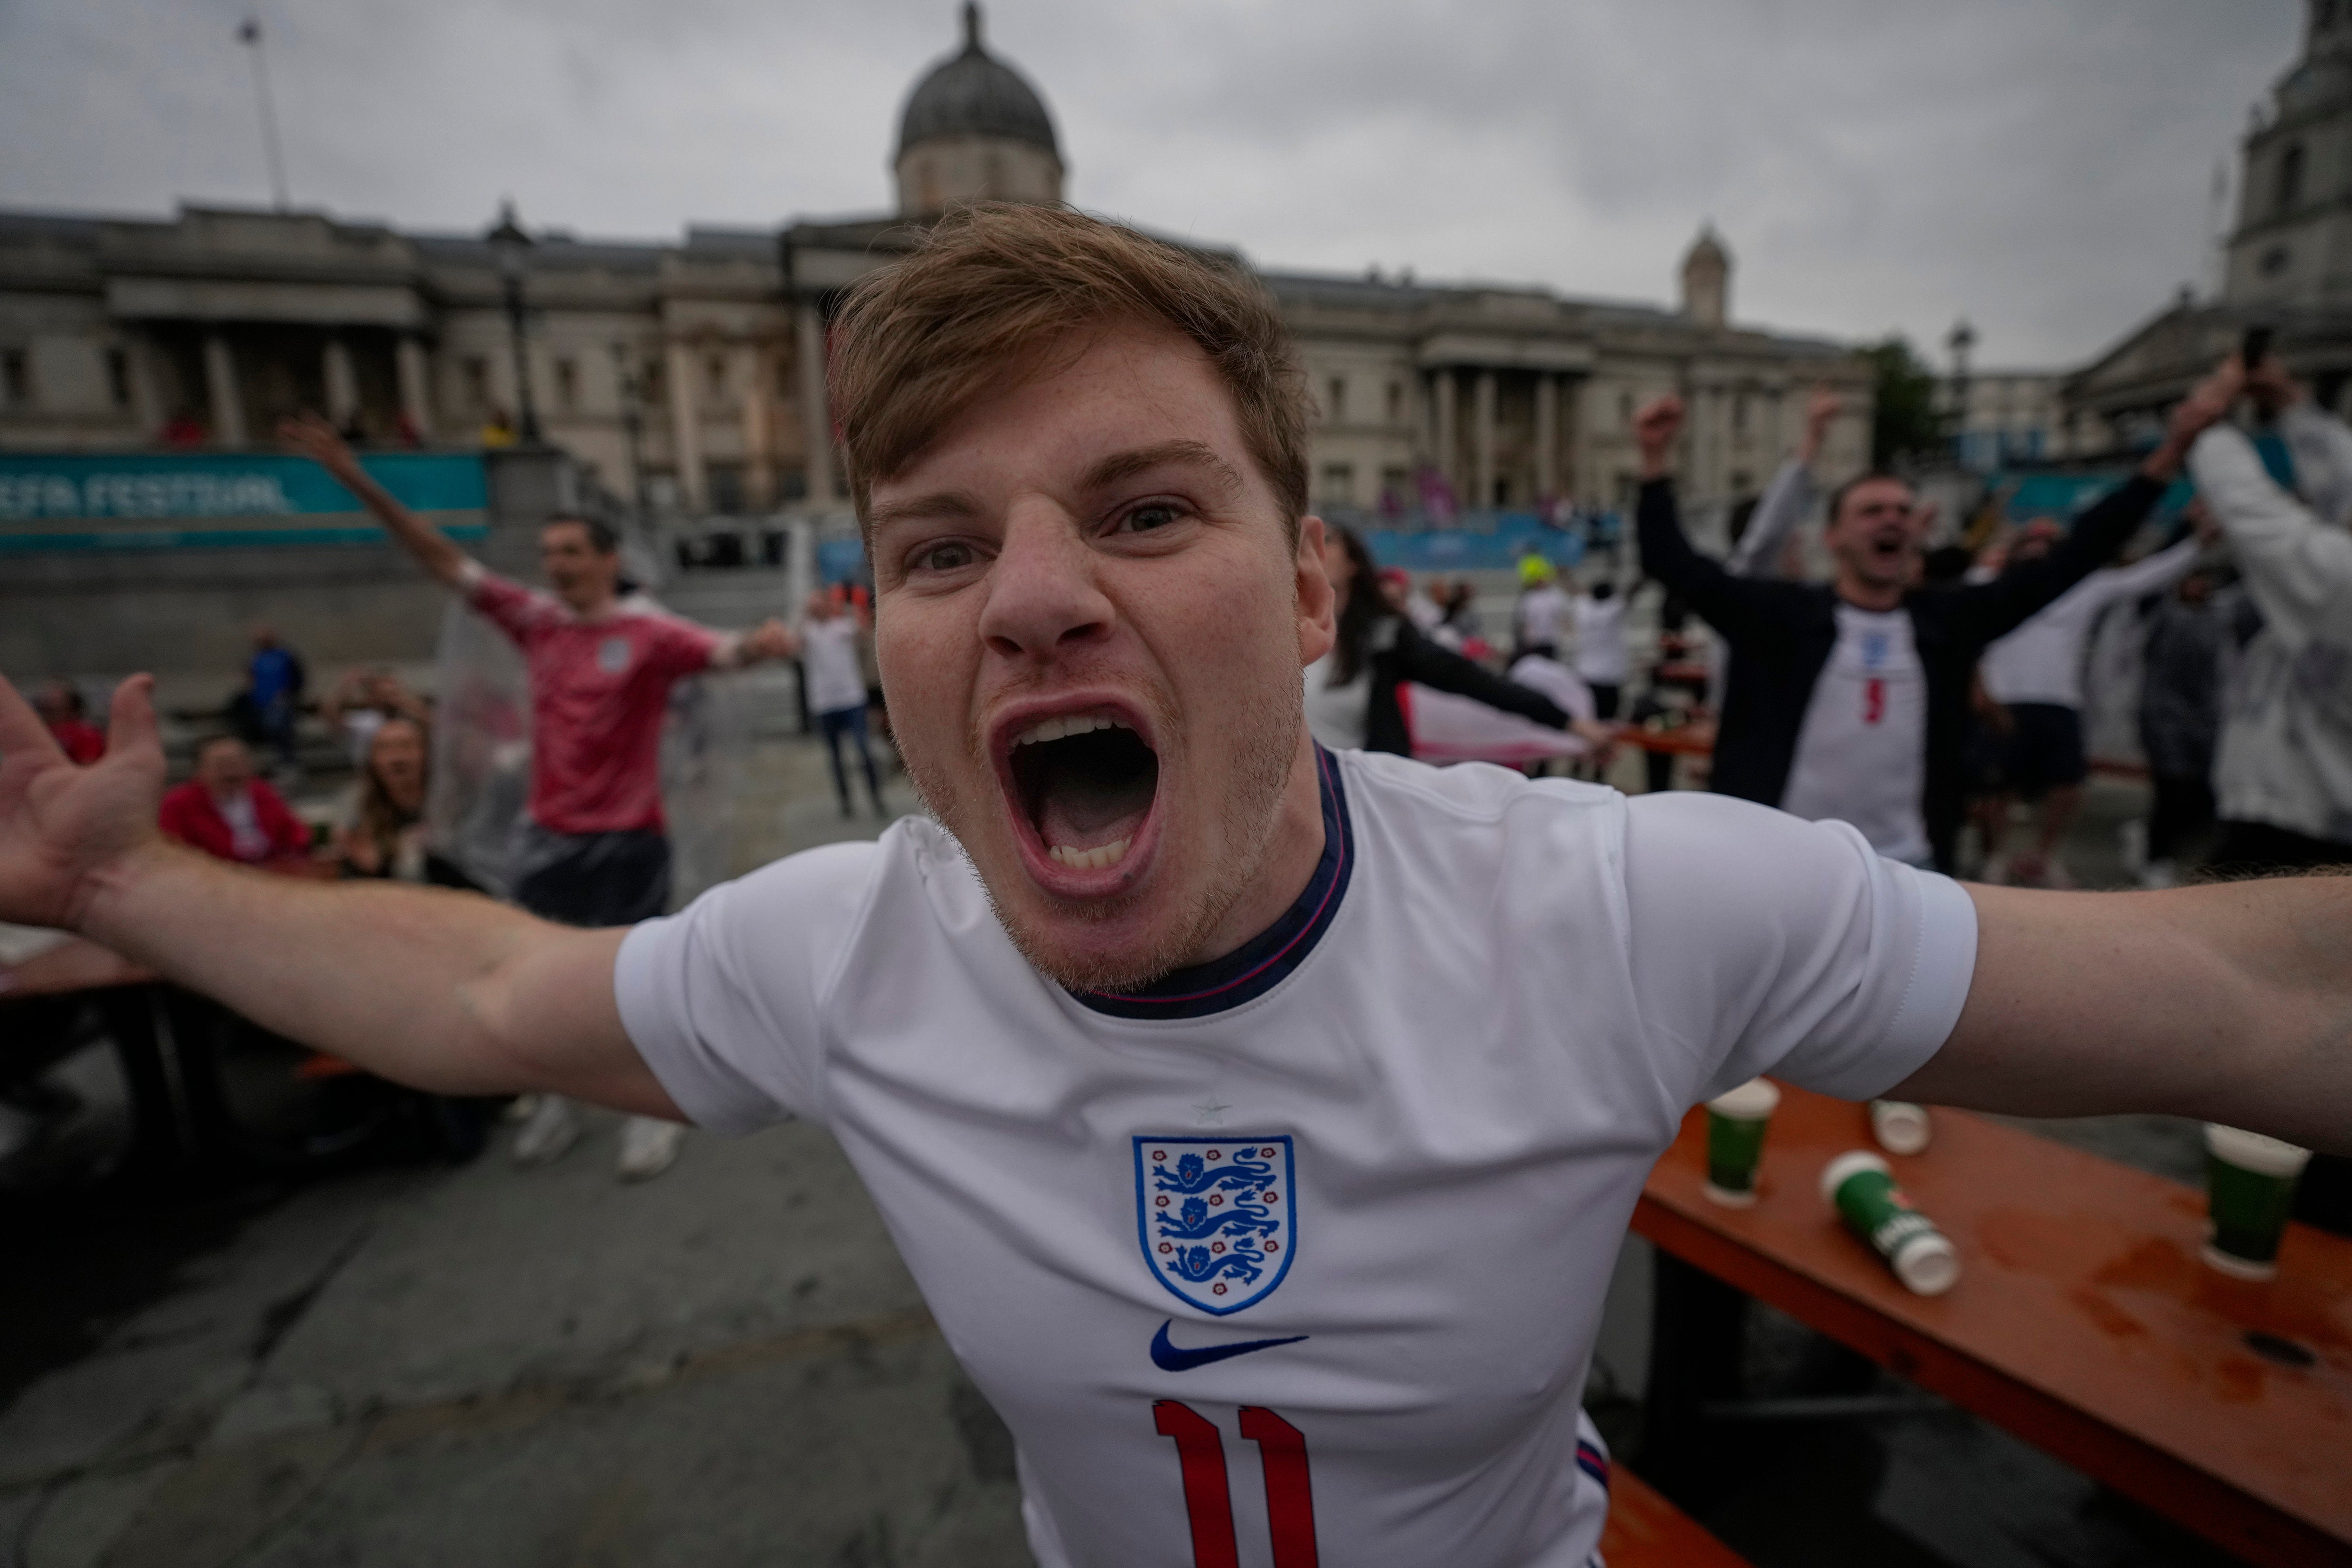 Celebrations at the fan zone in Trafalgar Square, London, after England beat Germany 2-0